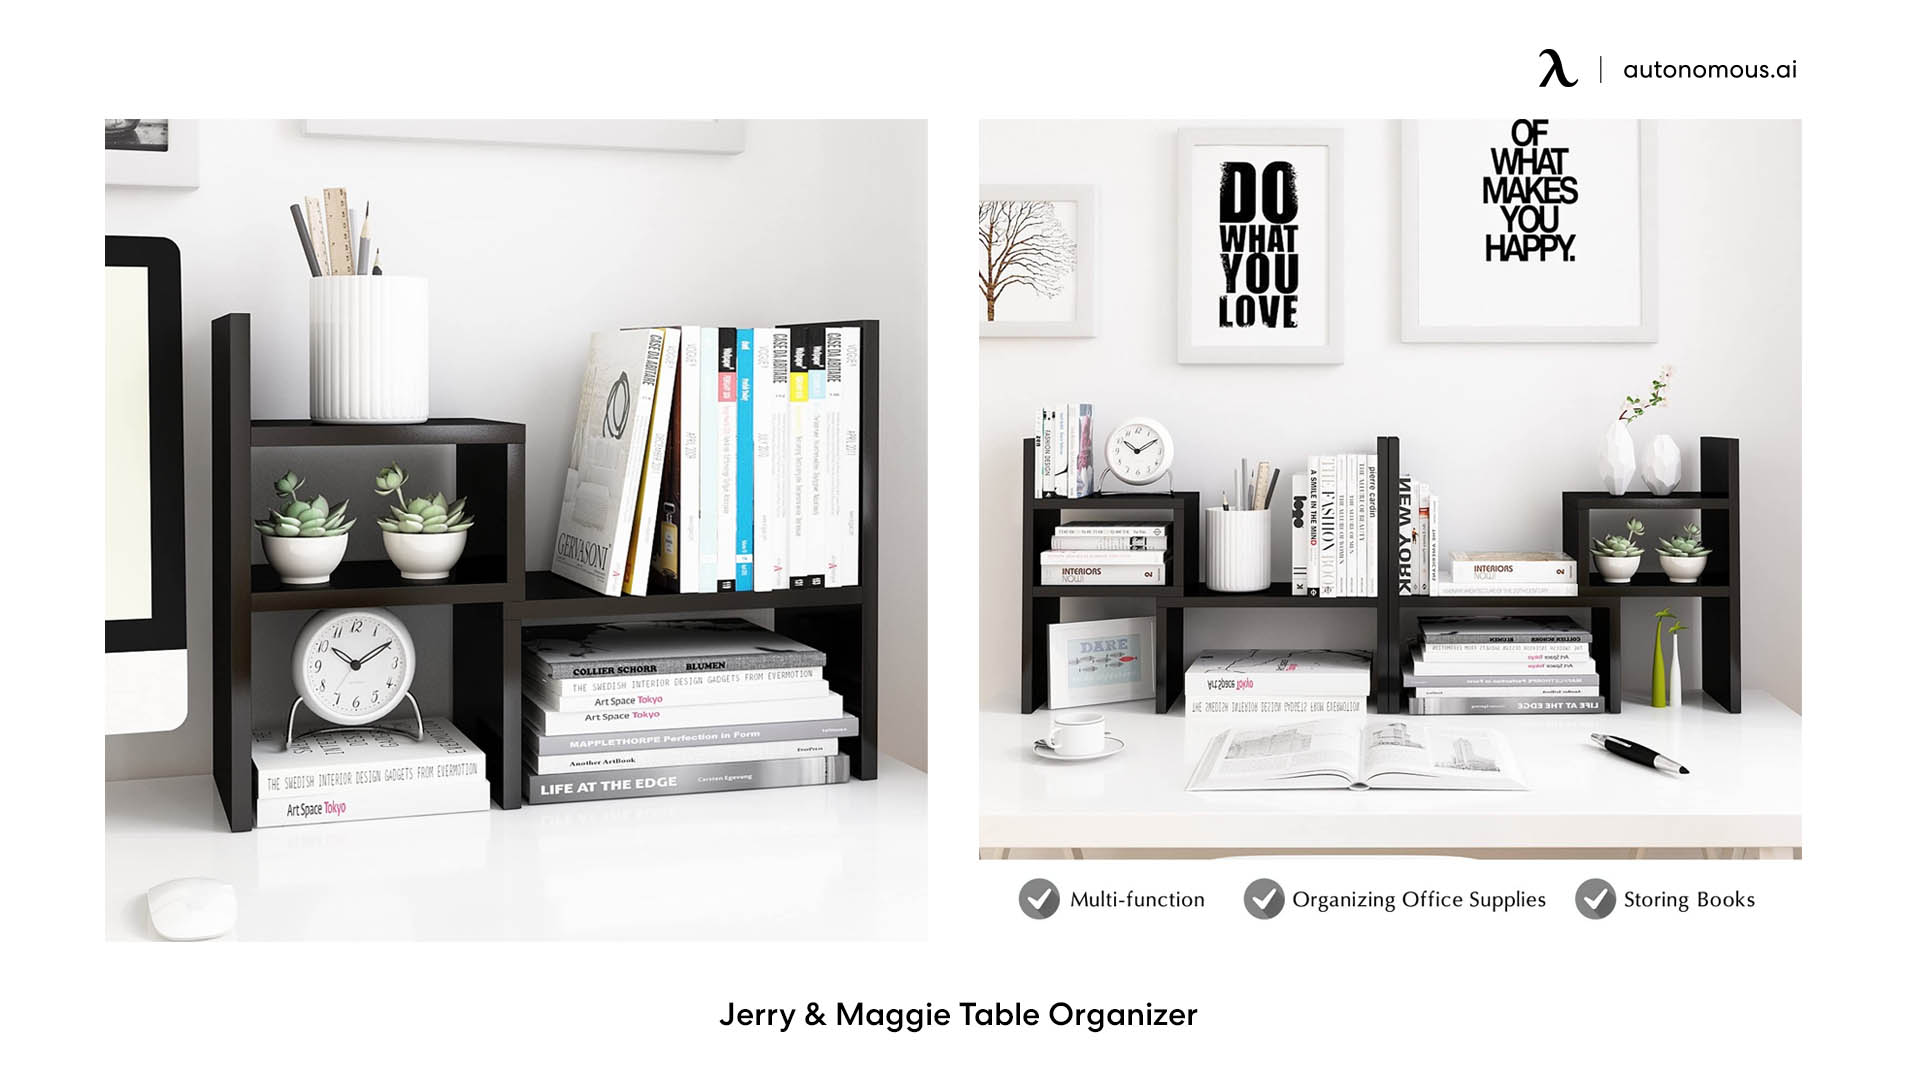 Jerry & Maggie Table Organizer